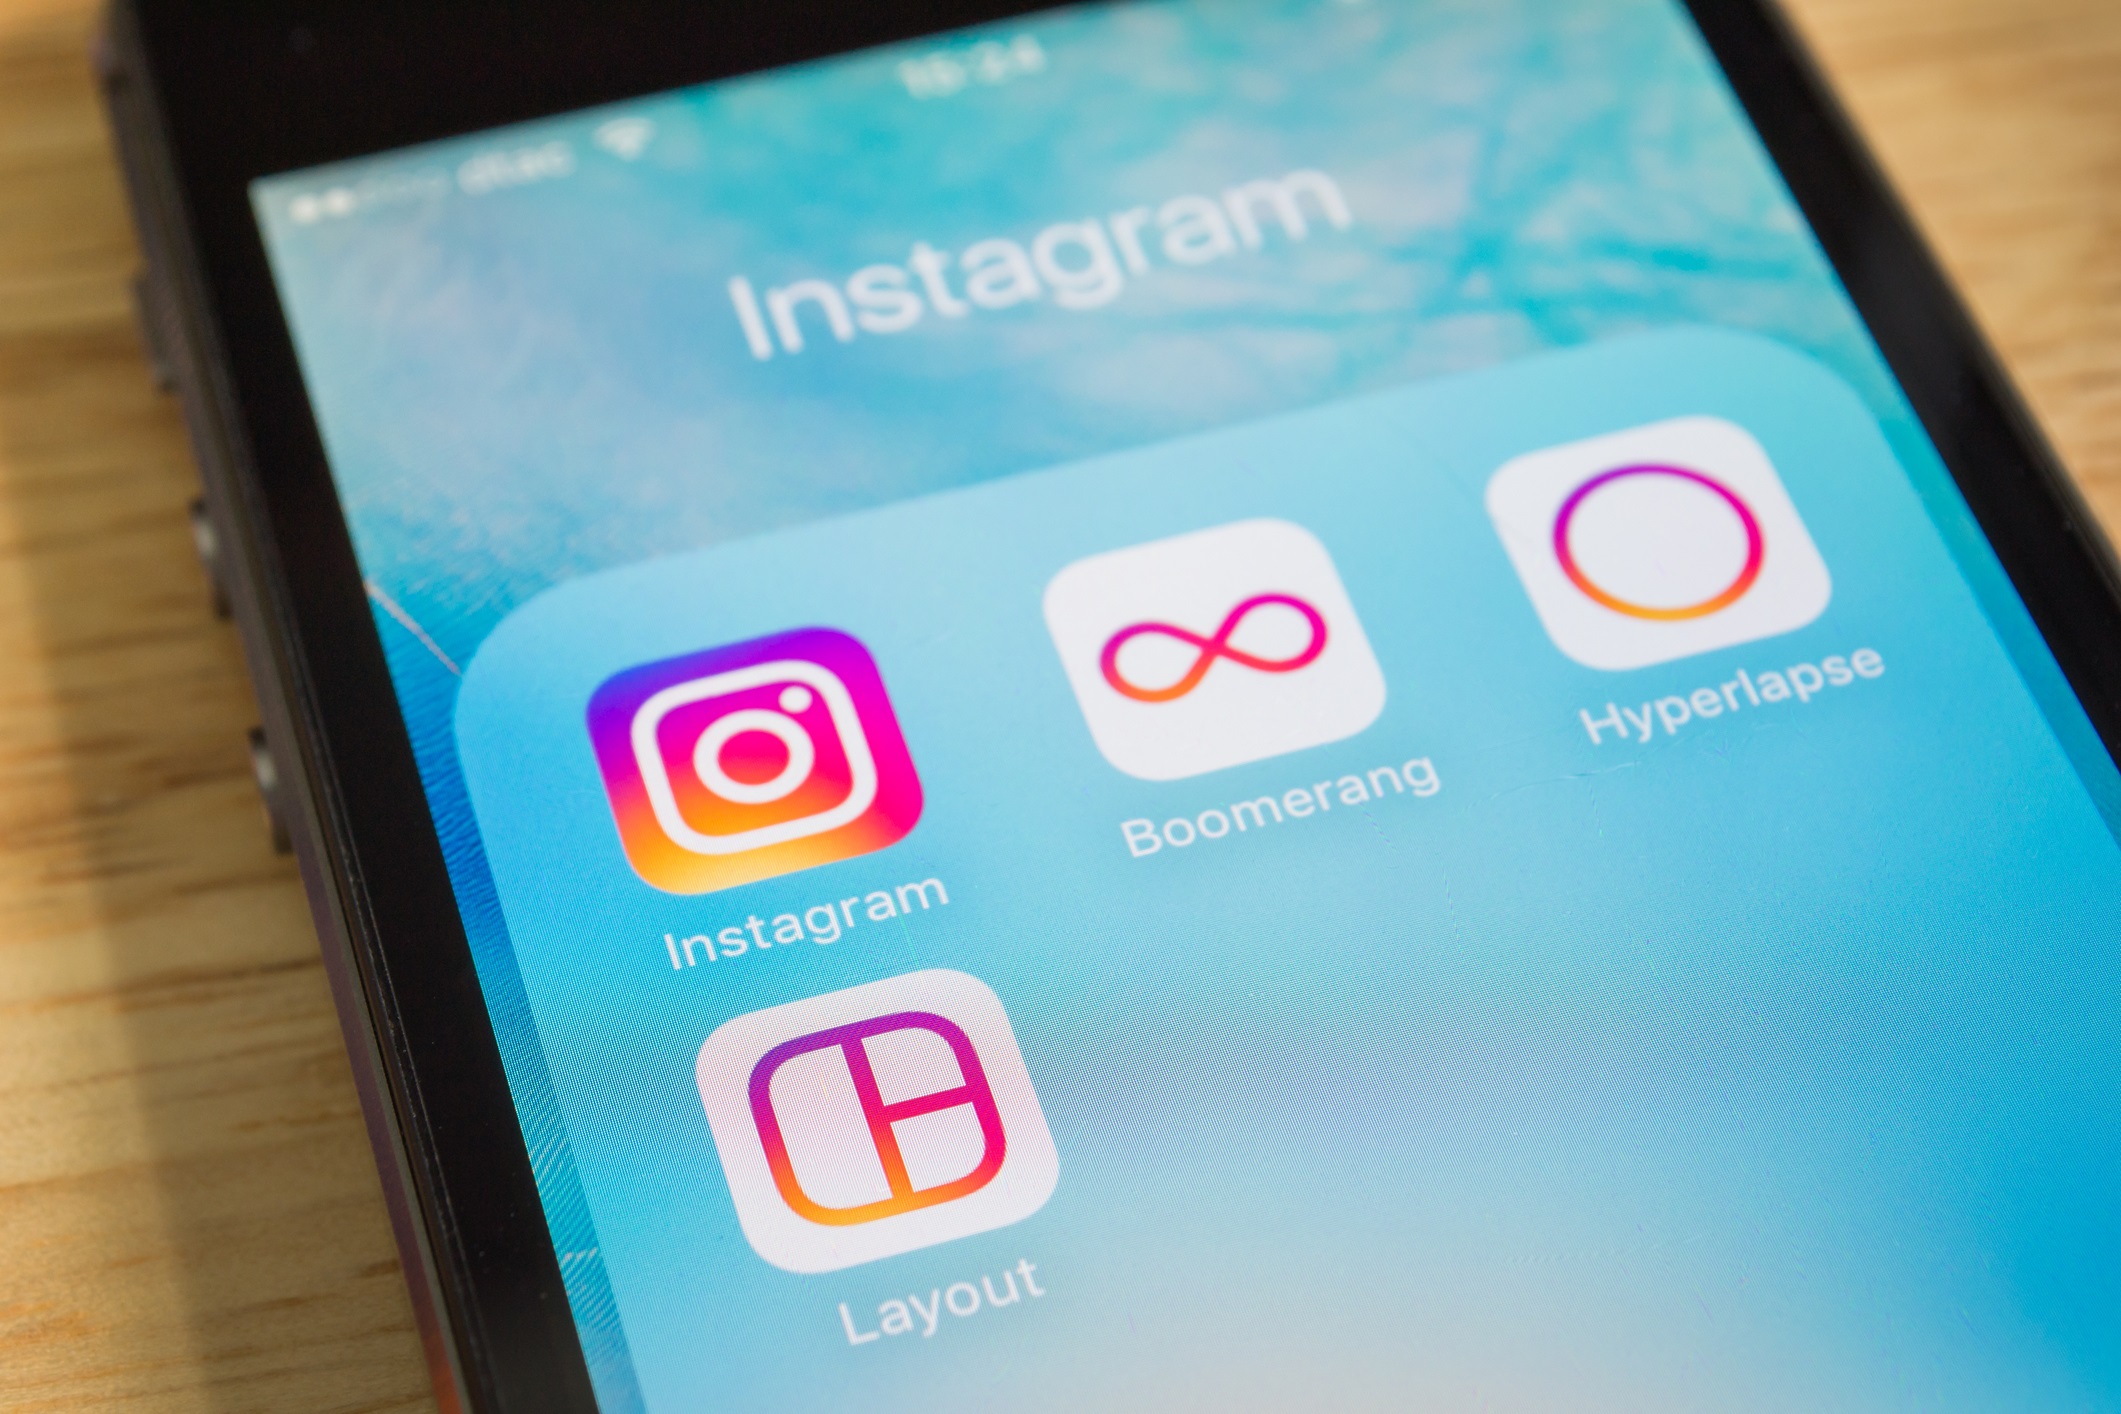 How Do You Attract Customers on Instagram?